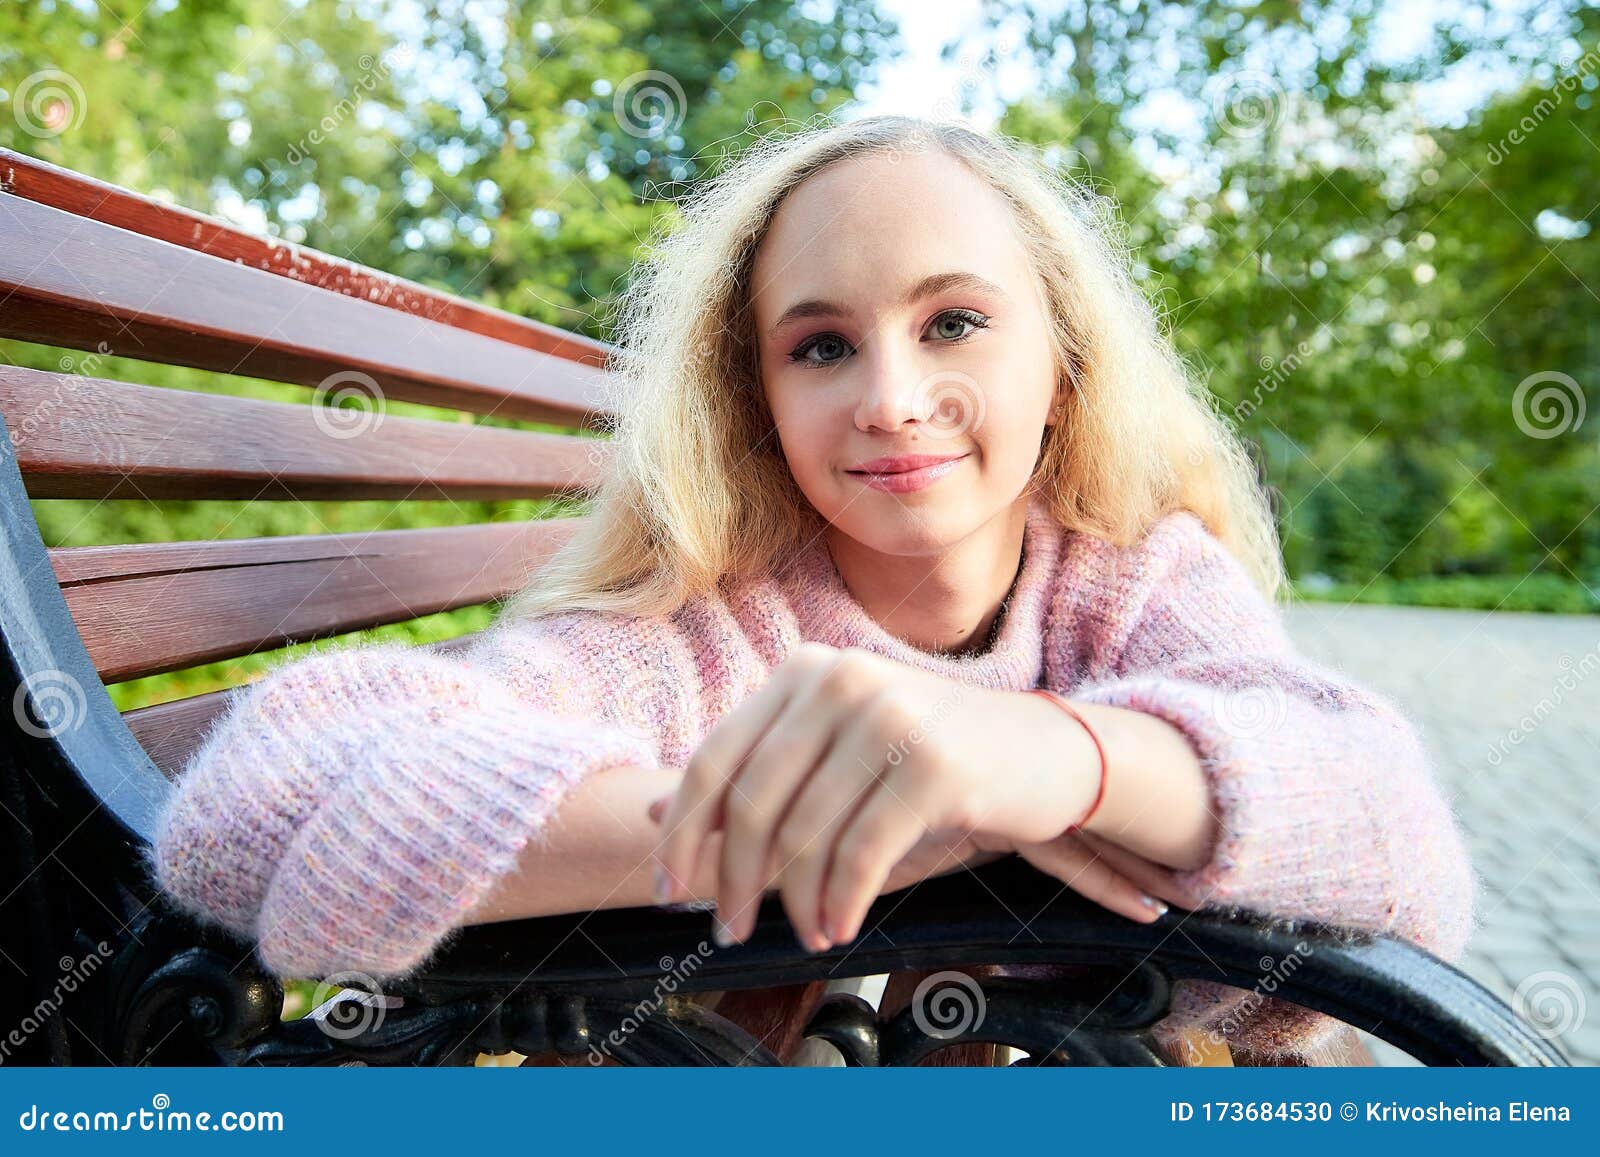 Pretty Teenage Girl 14 16 Year Old With Curly Long Blonde Hair In The Green Park On The Bench In 